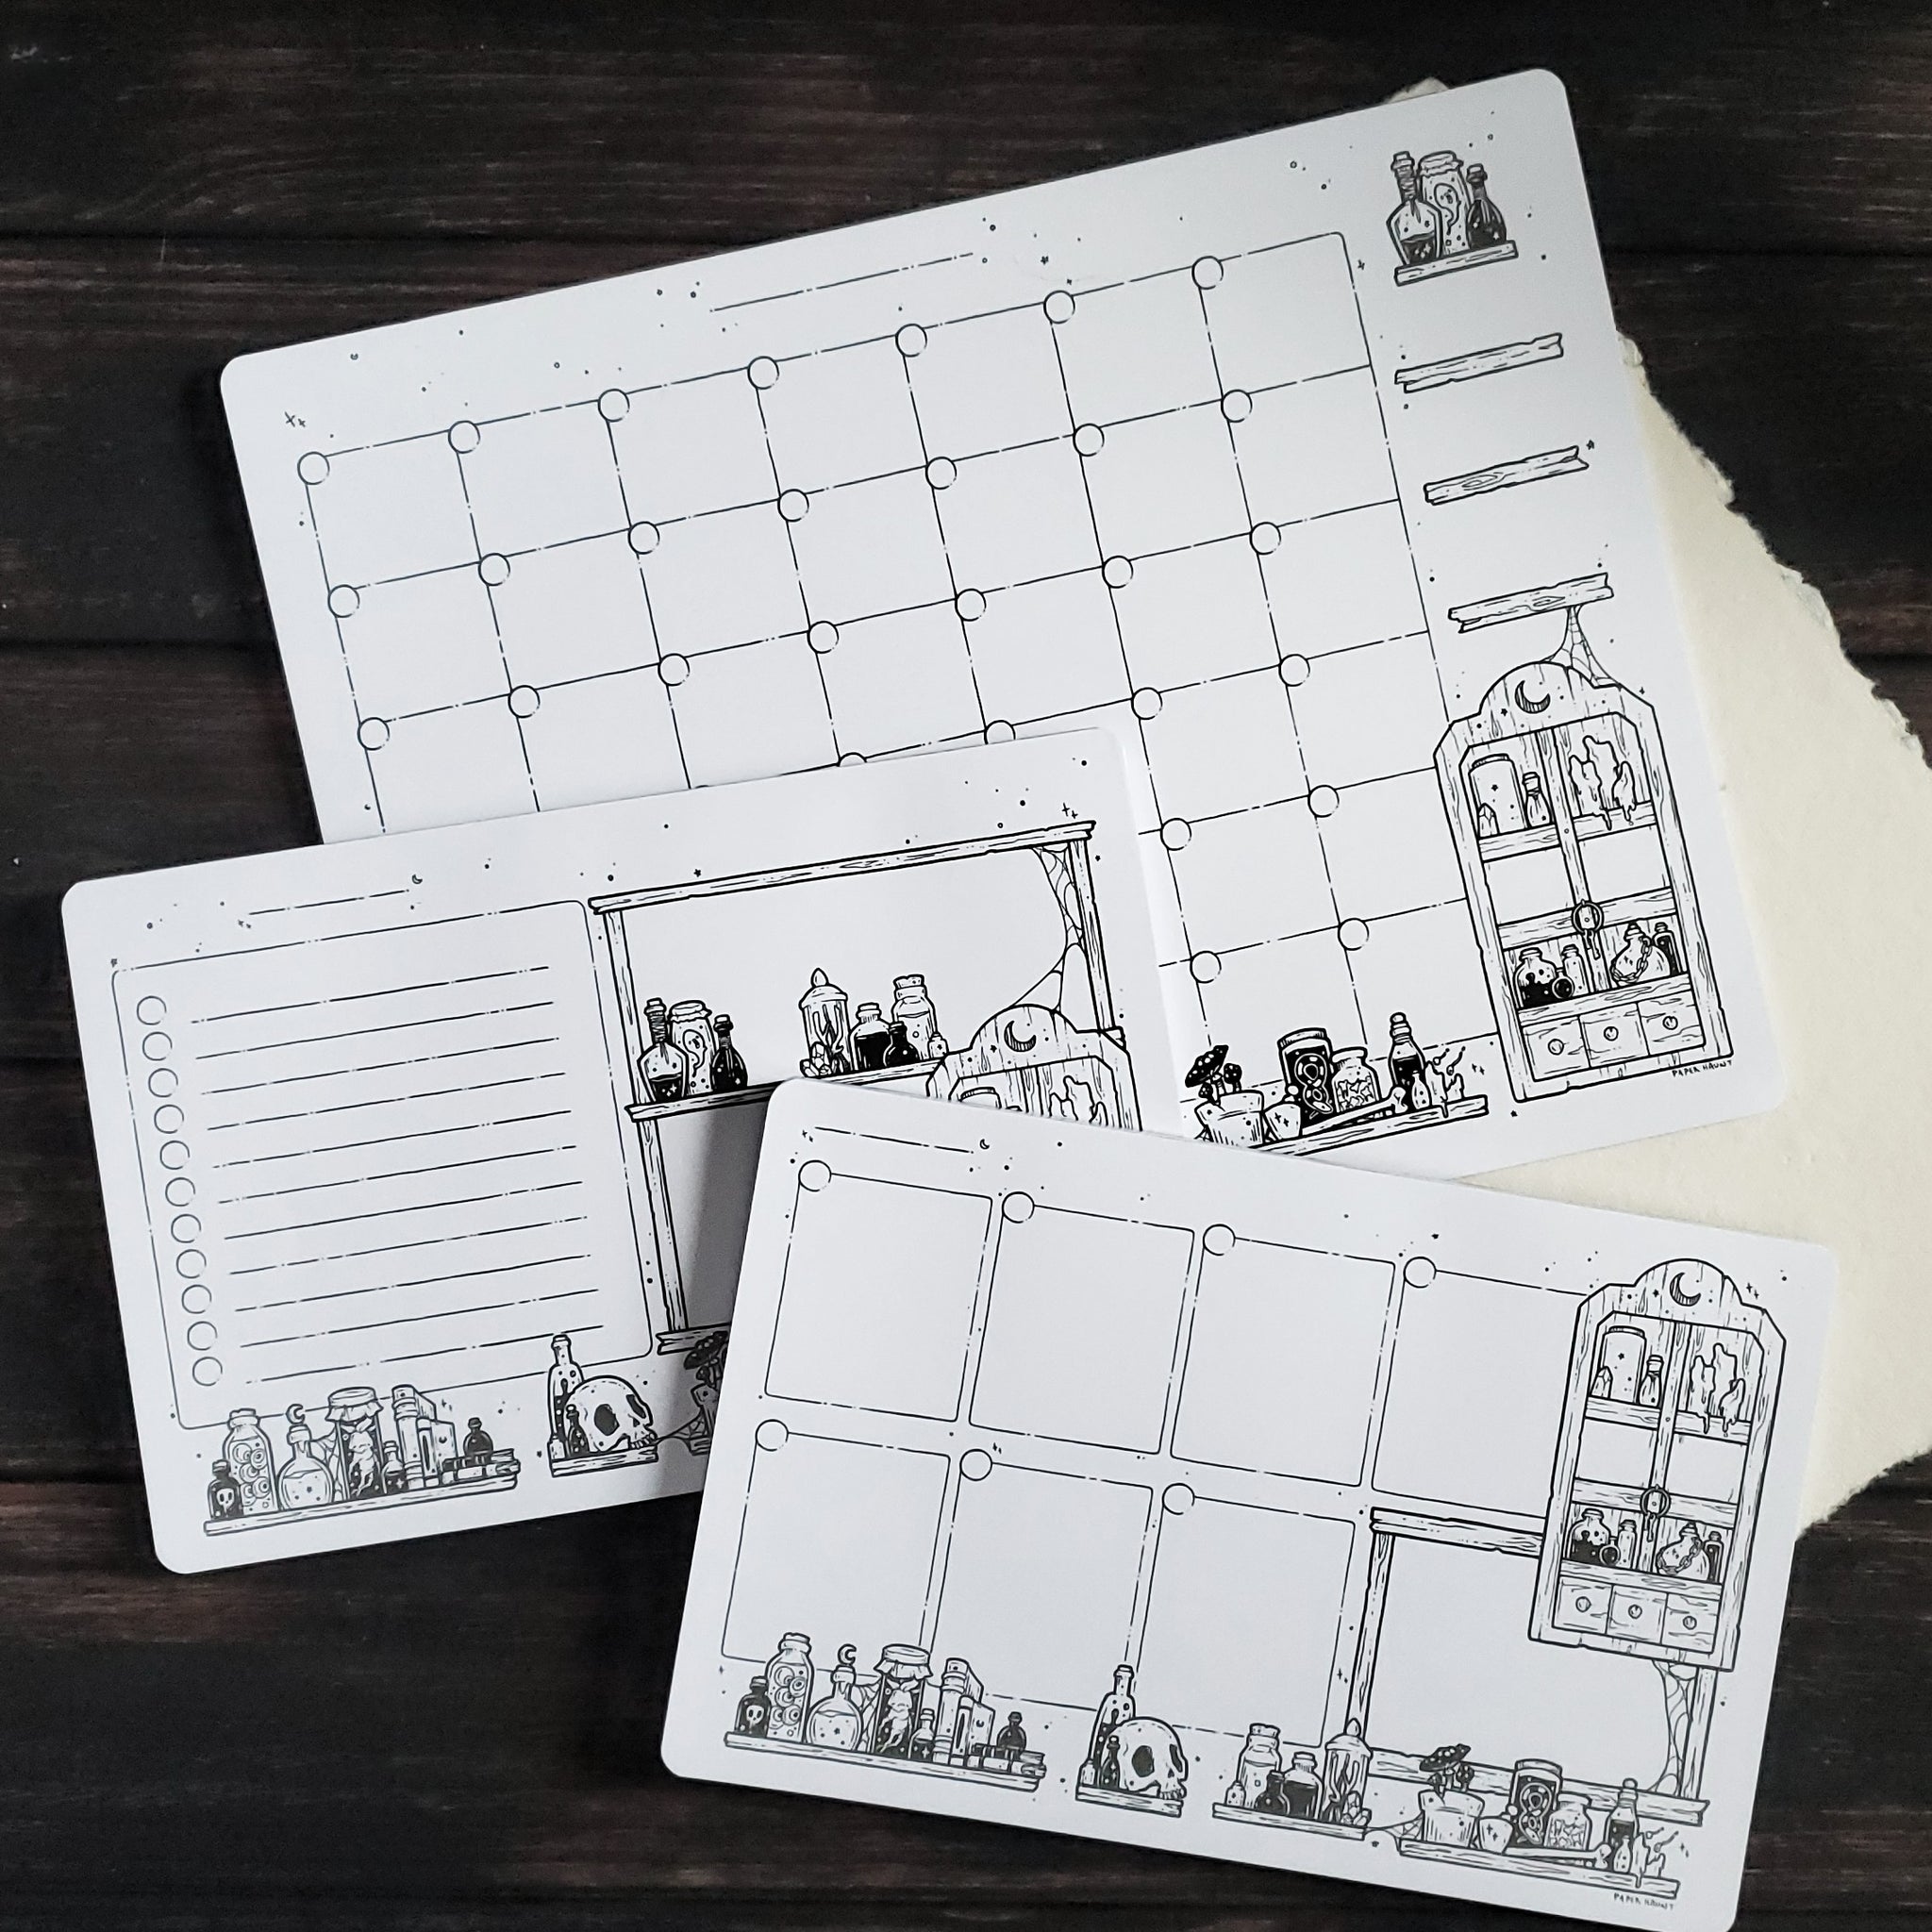 Potion Shelf planner note pads